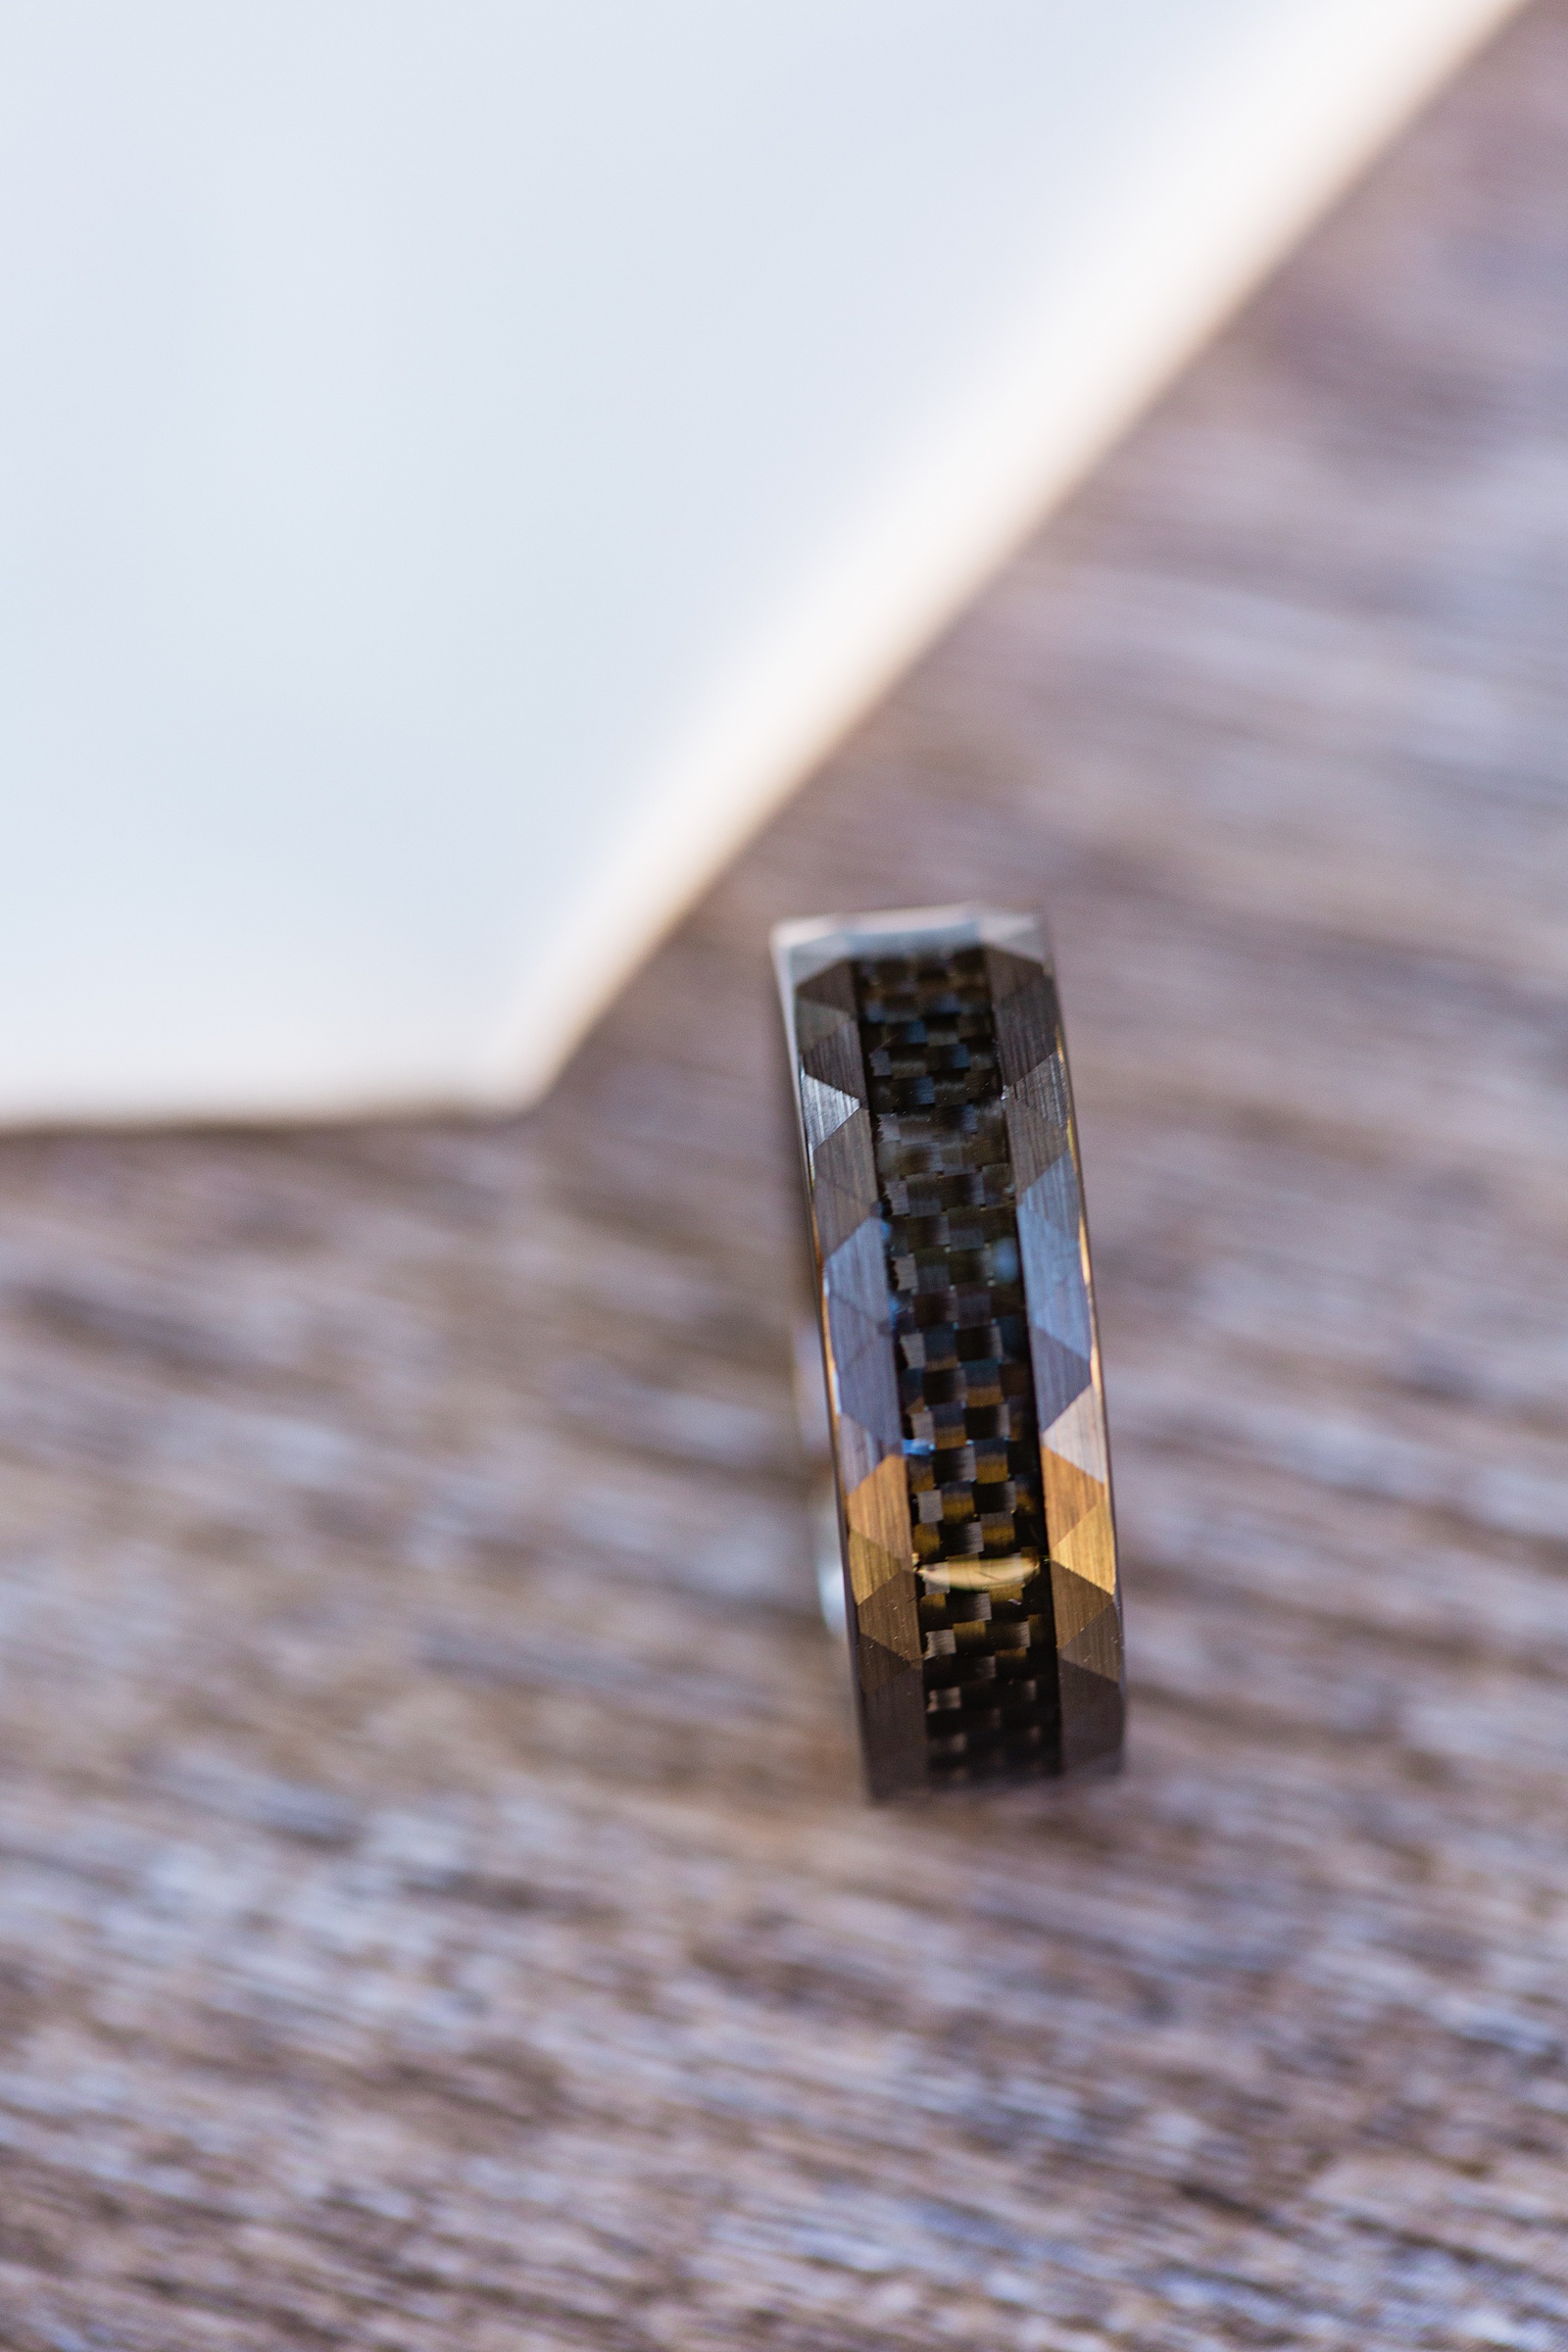 Grooms unique black wedding ring by PMA Photography.